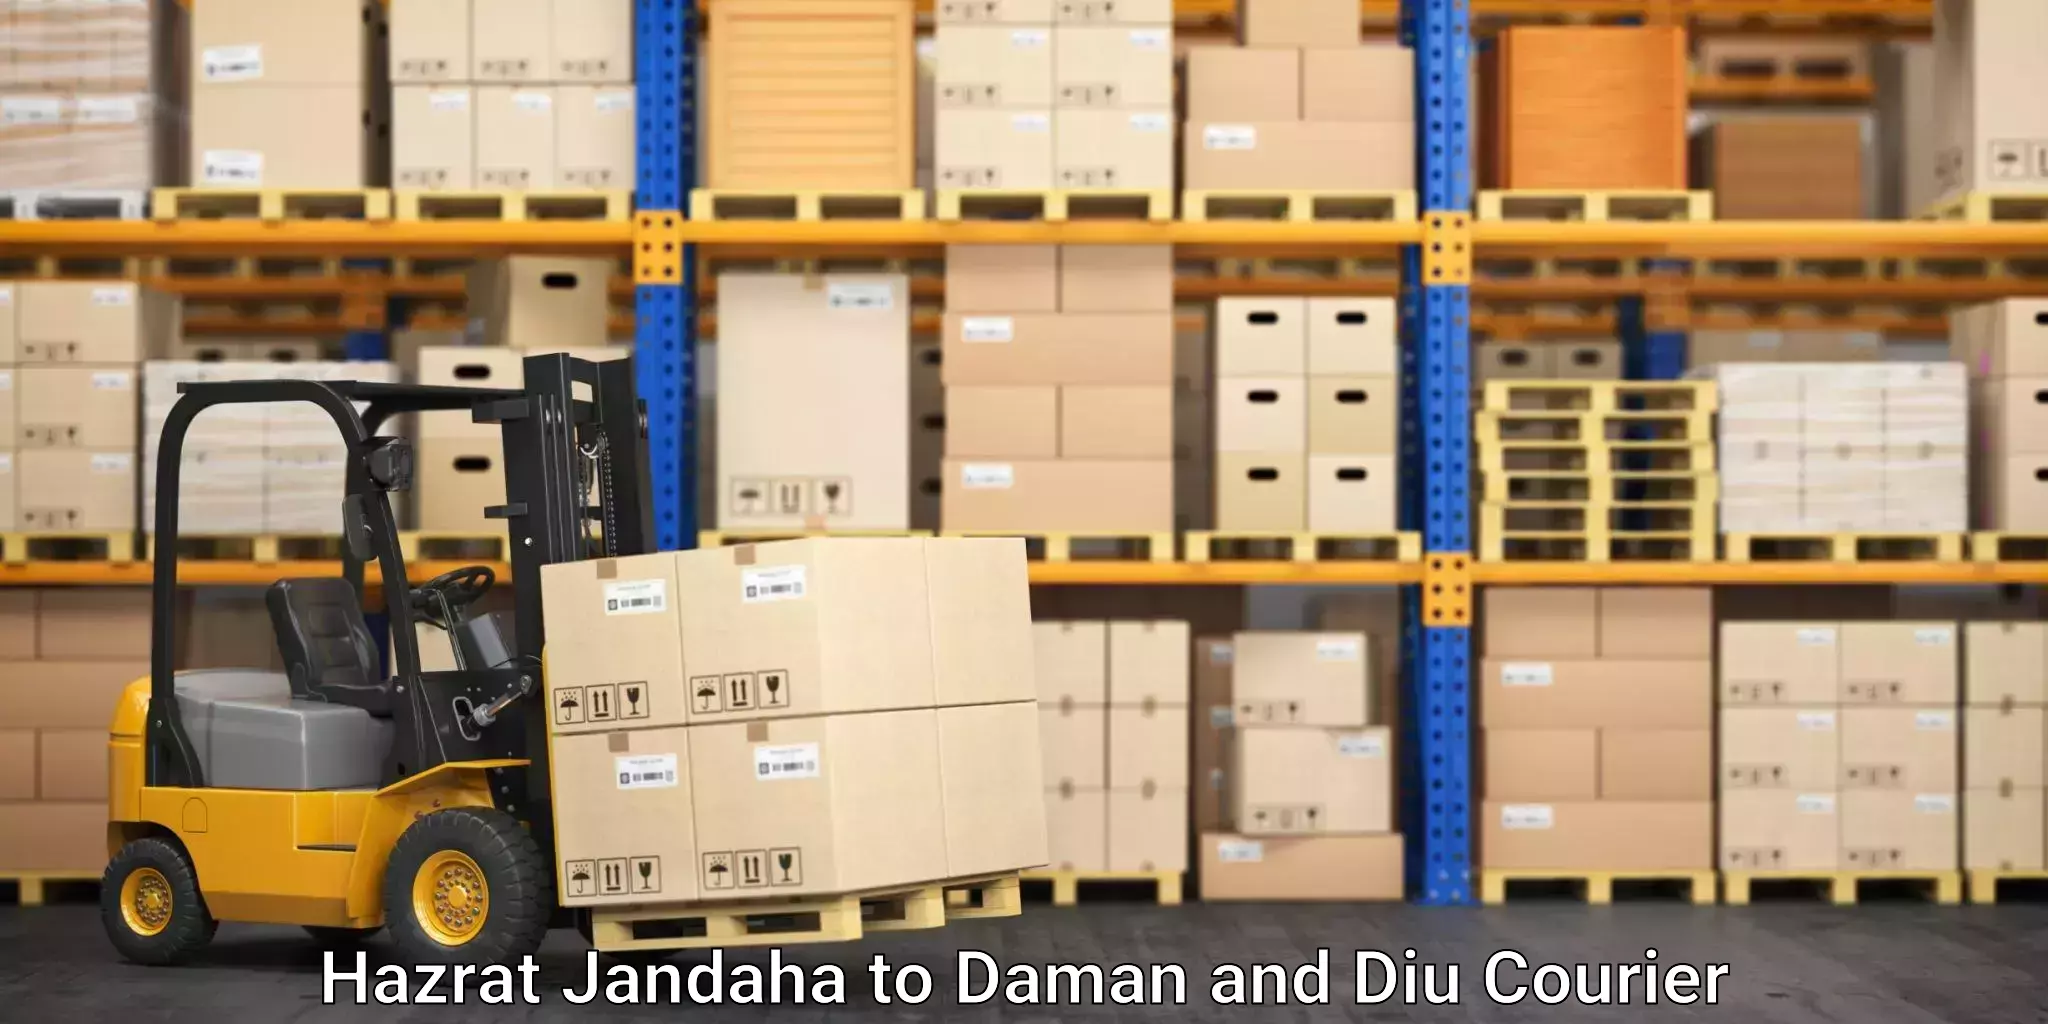 Flexible moving solutions in Hazrat Jandaha to Daman and Diu